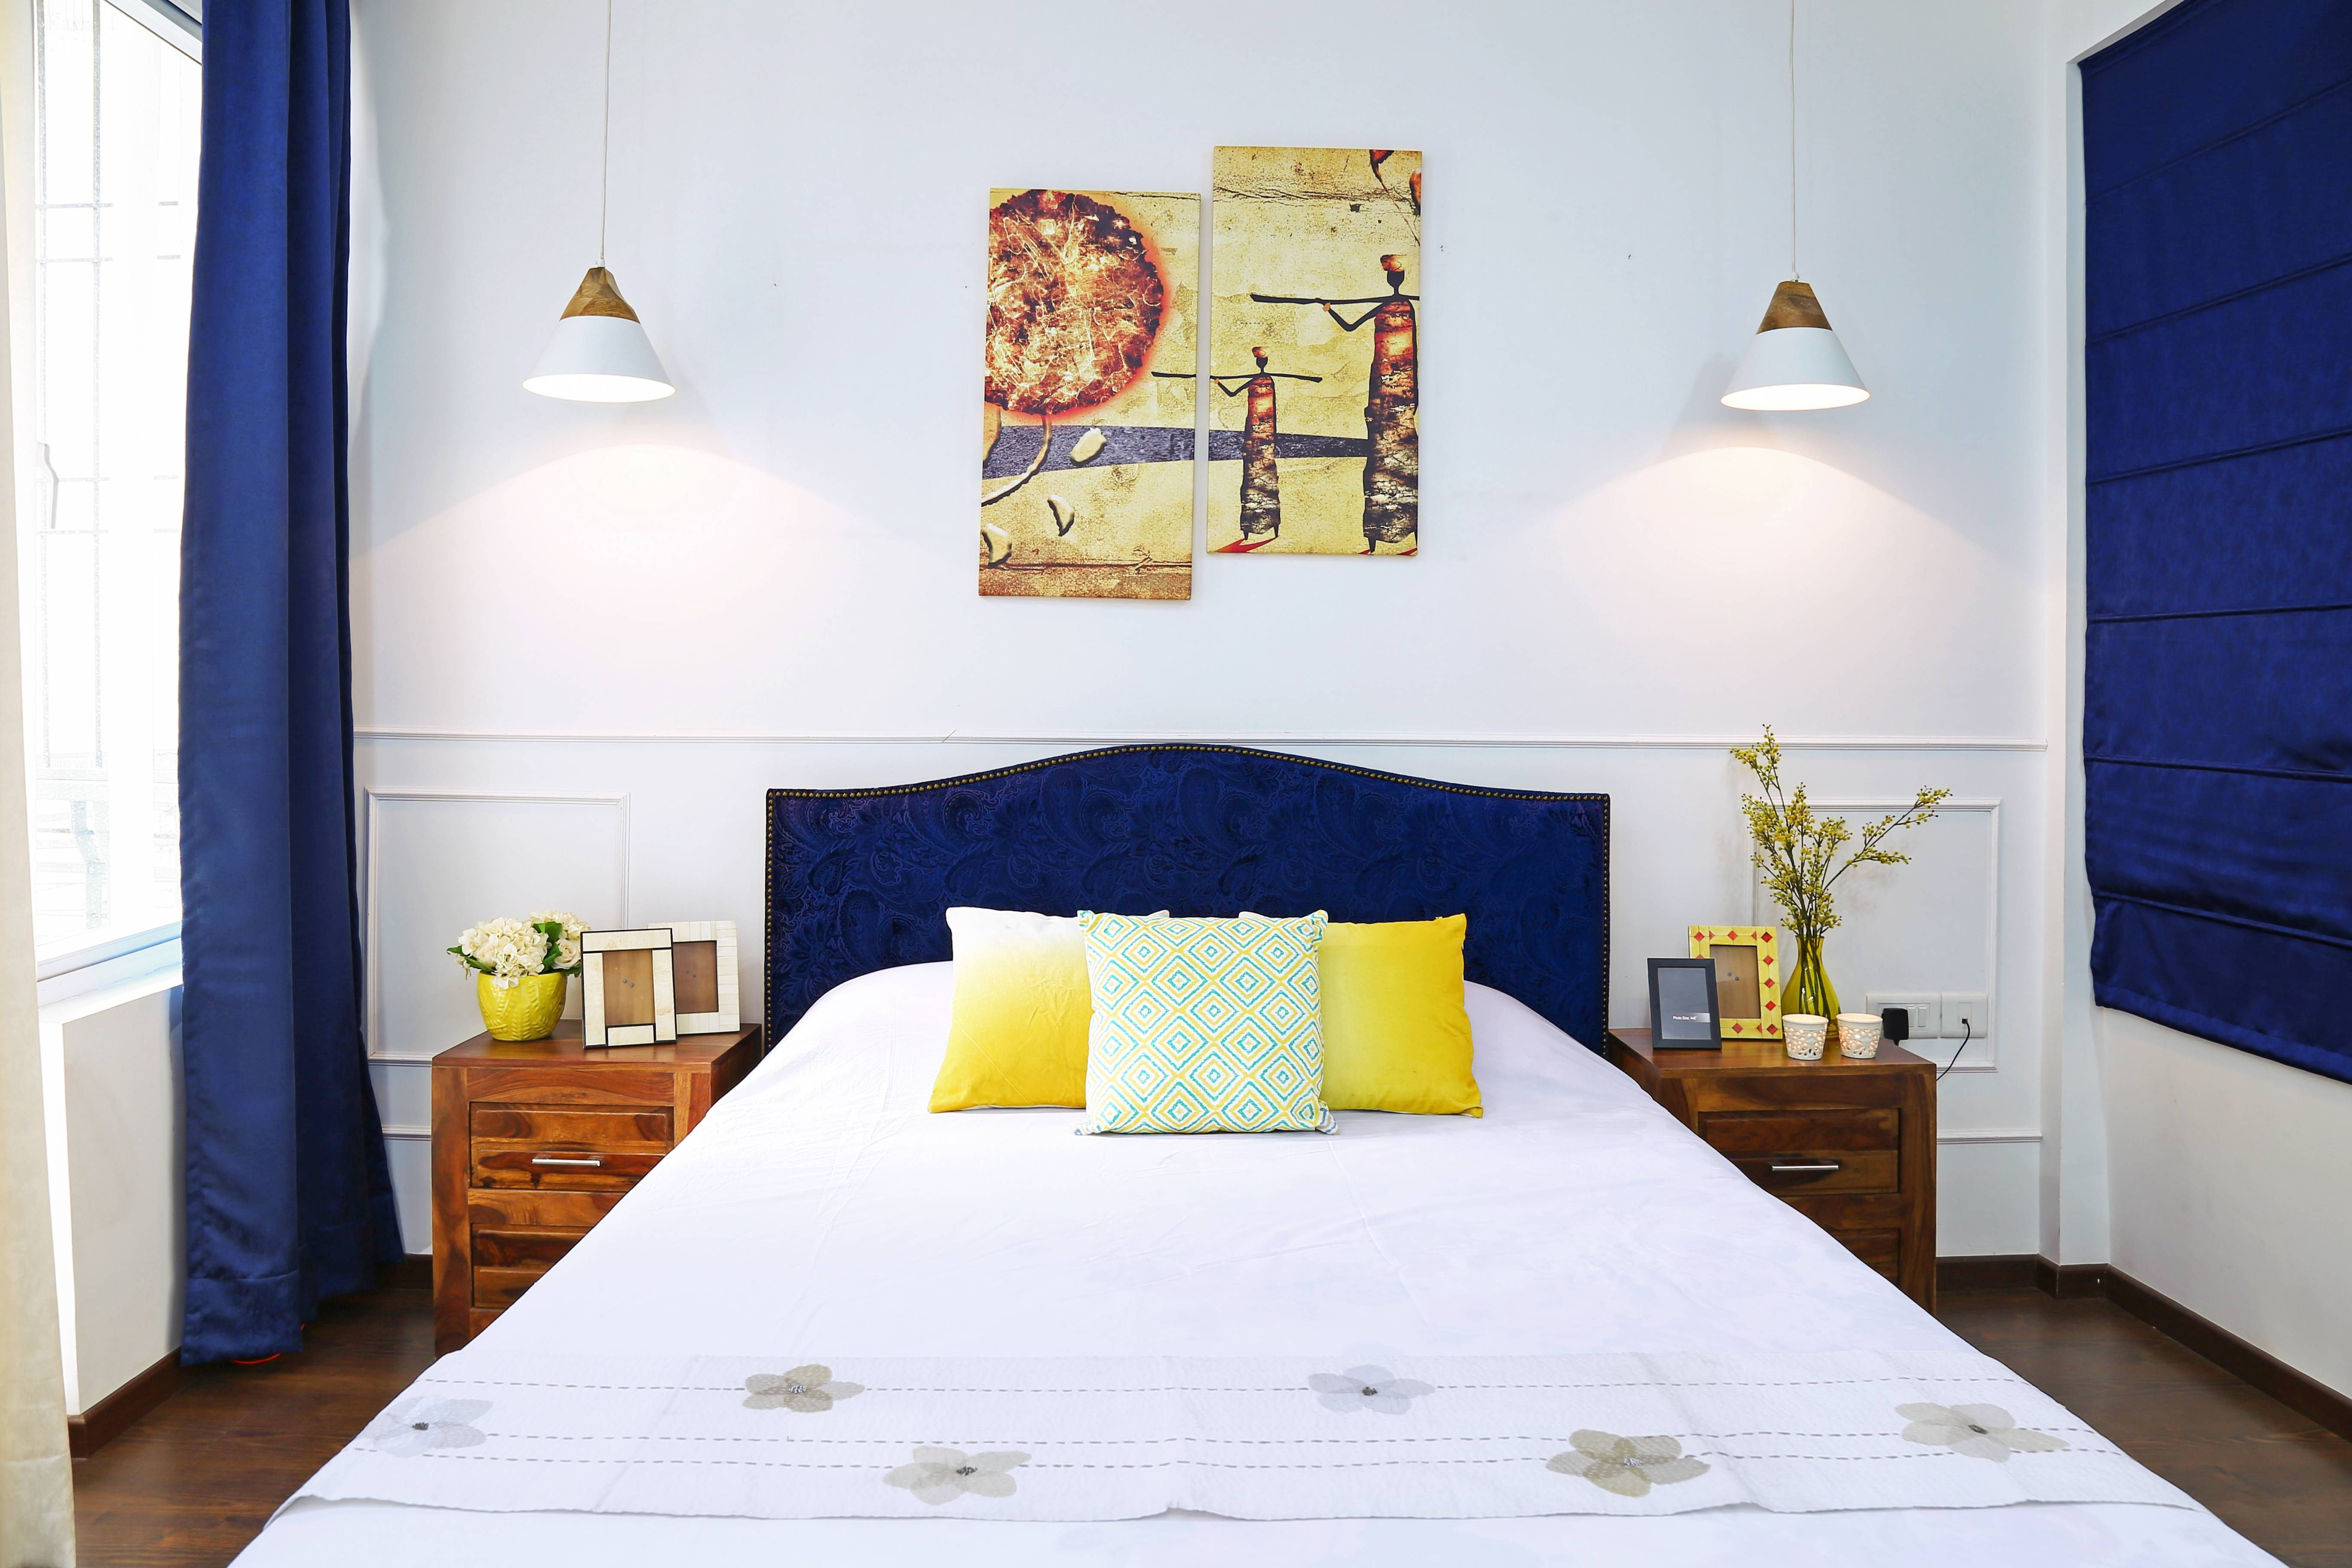 Modern Guest Room Design With Electric Blue Headboard